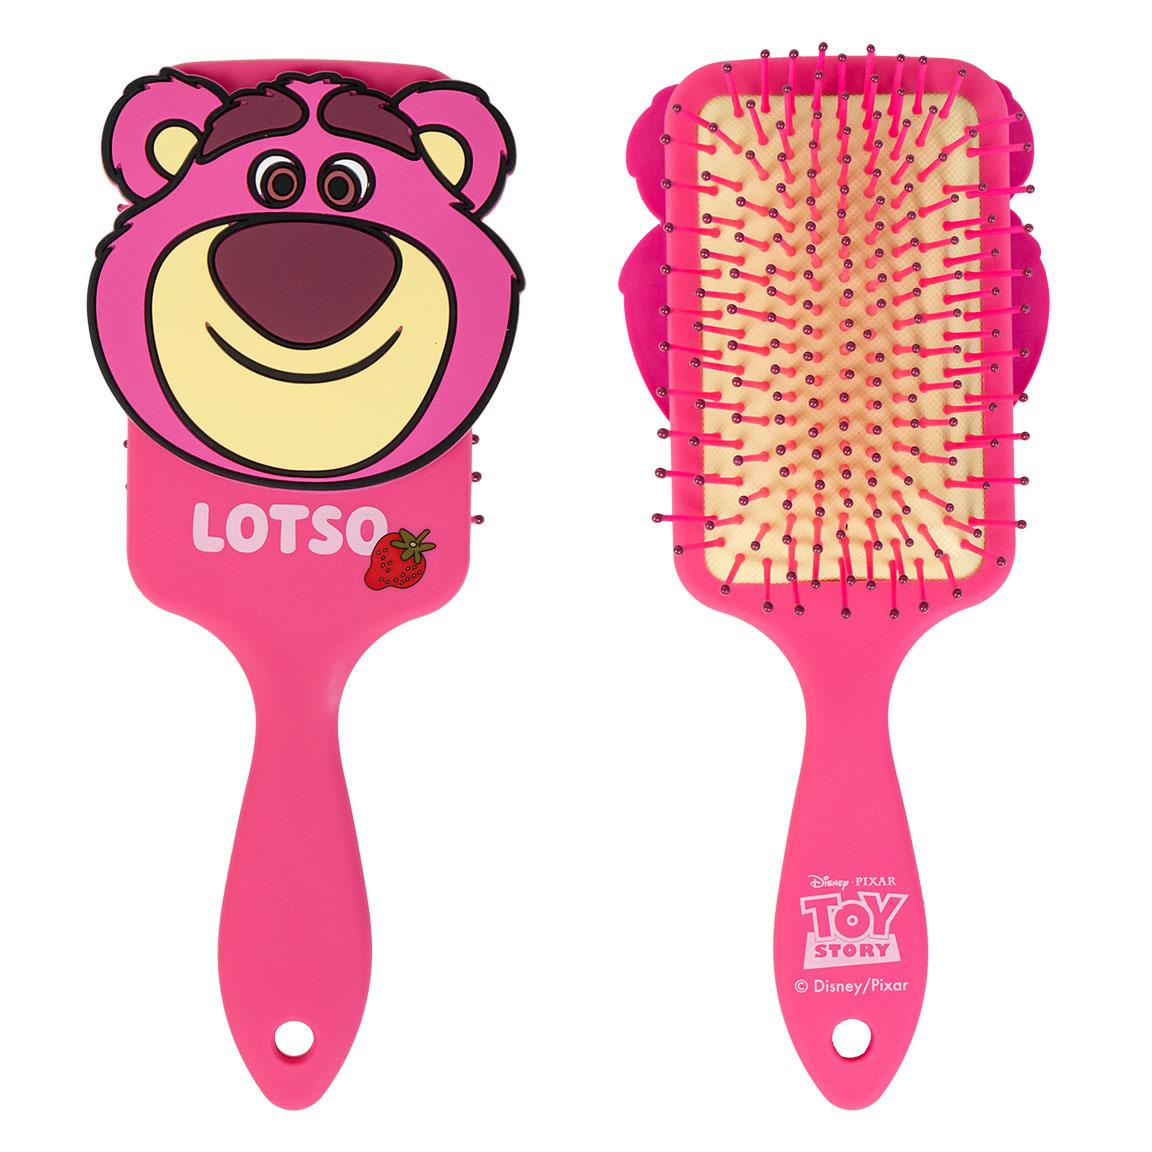 Brosses rectangulaires Toy Story Lotso Brushes